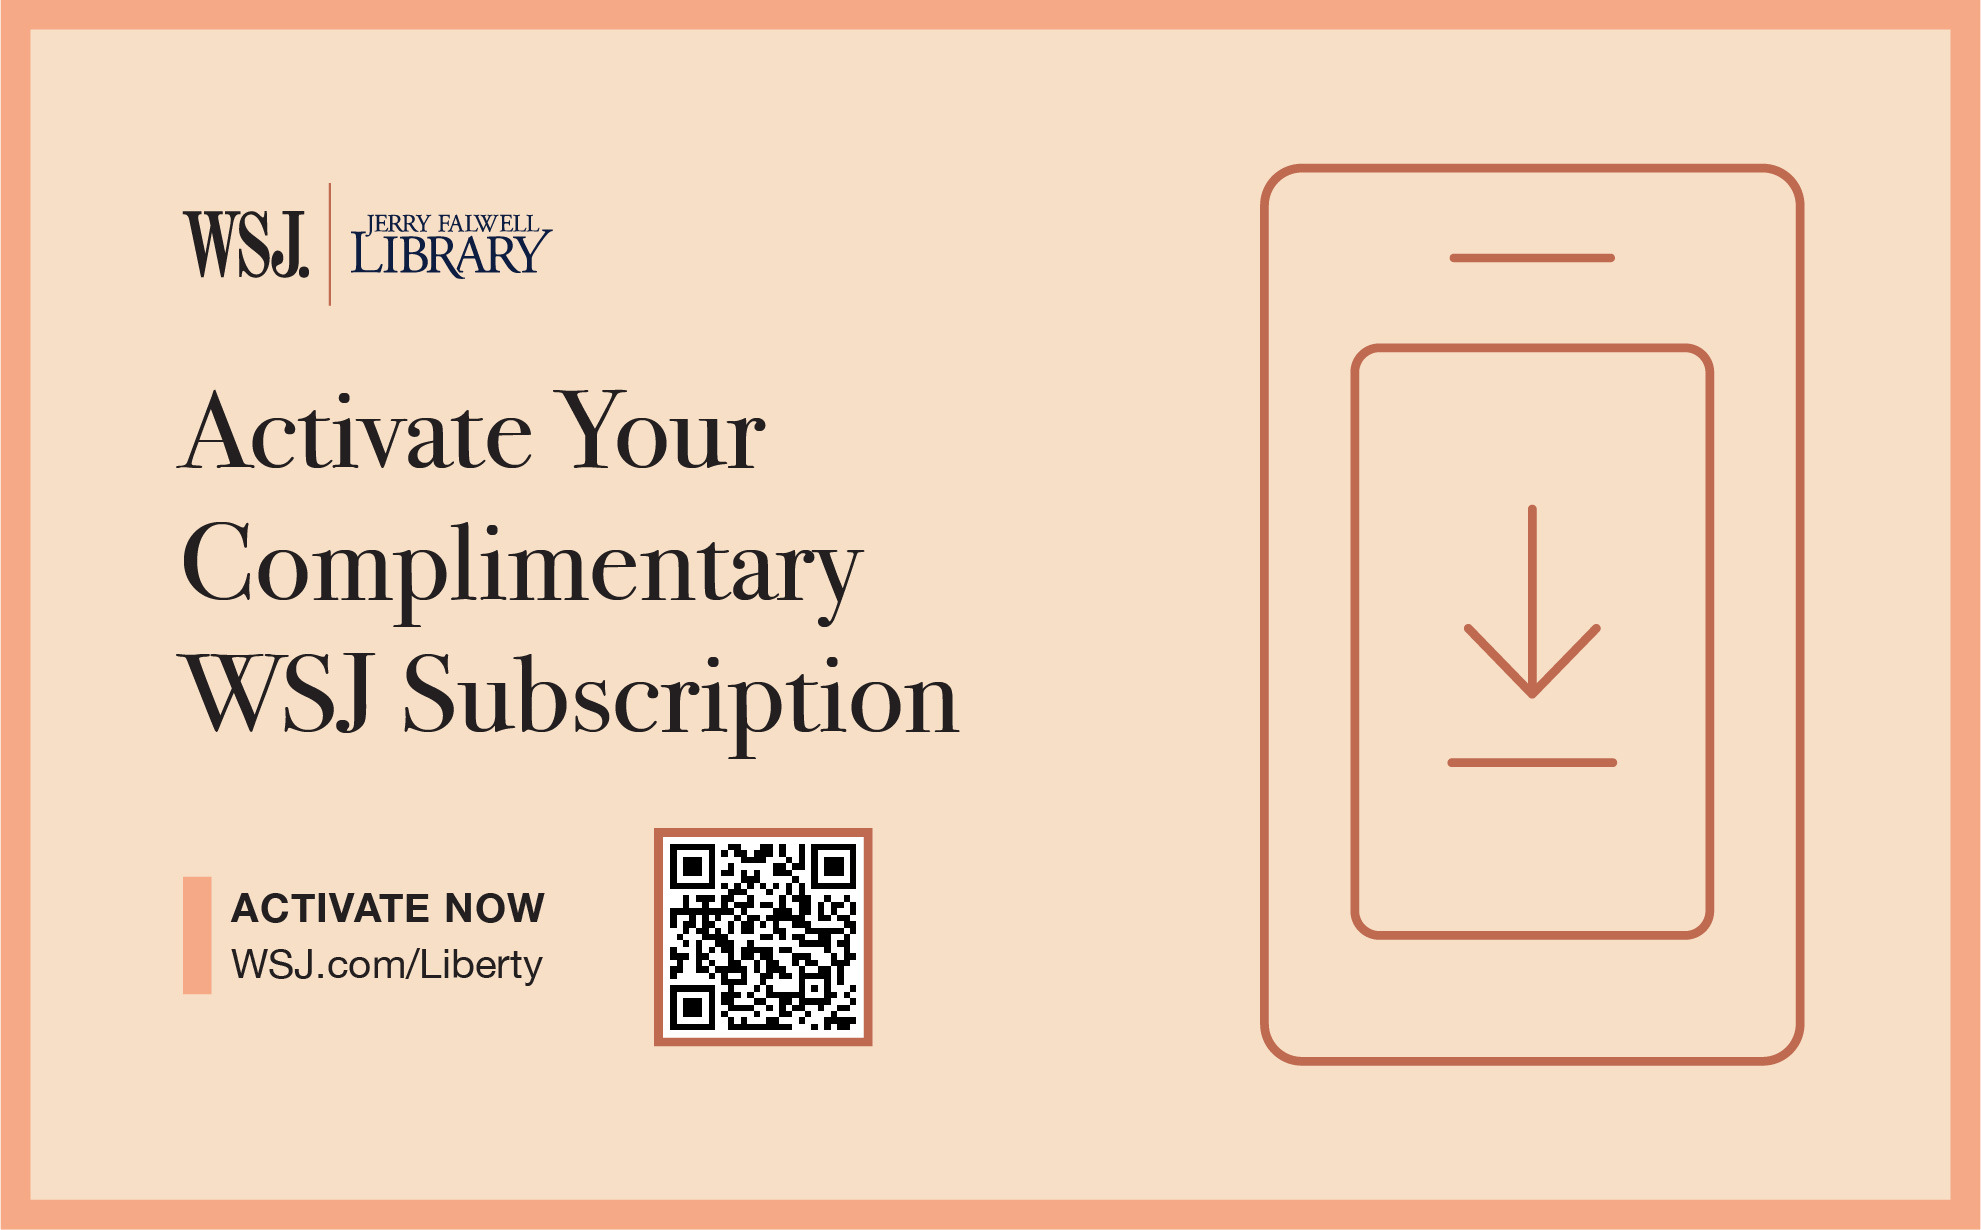 Activate your complimentary Wall Street Journal Subscription by going to WSJ.com/Liberty